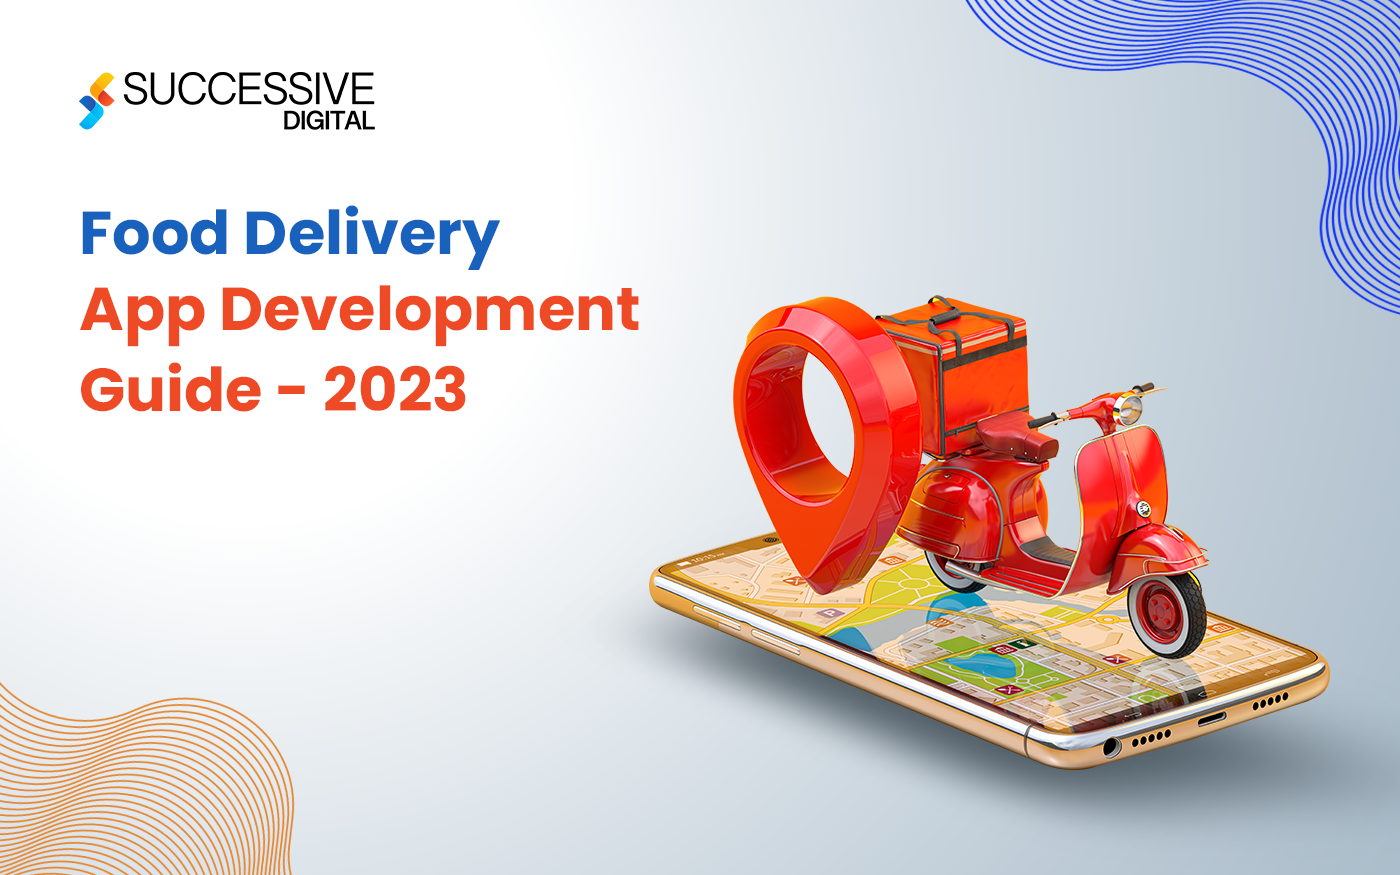 The Complete Guide To Food Delivery App Development – 2023